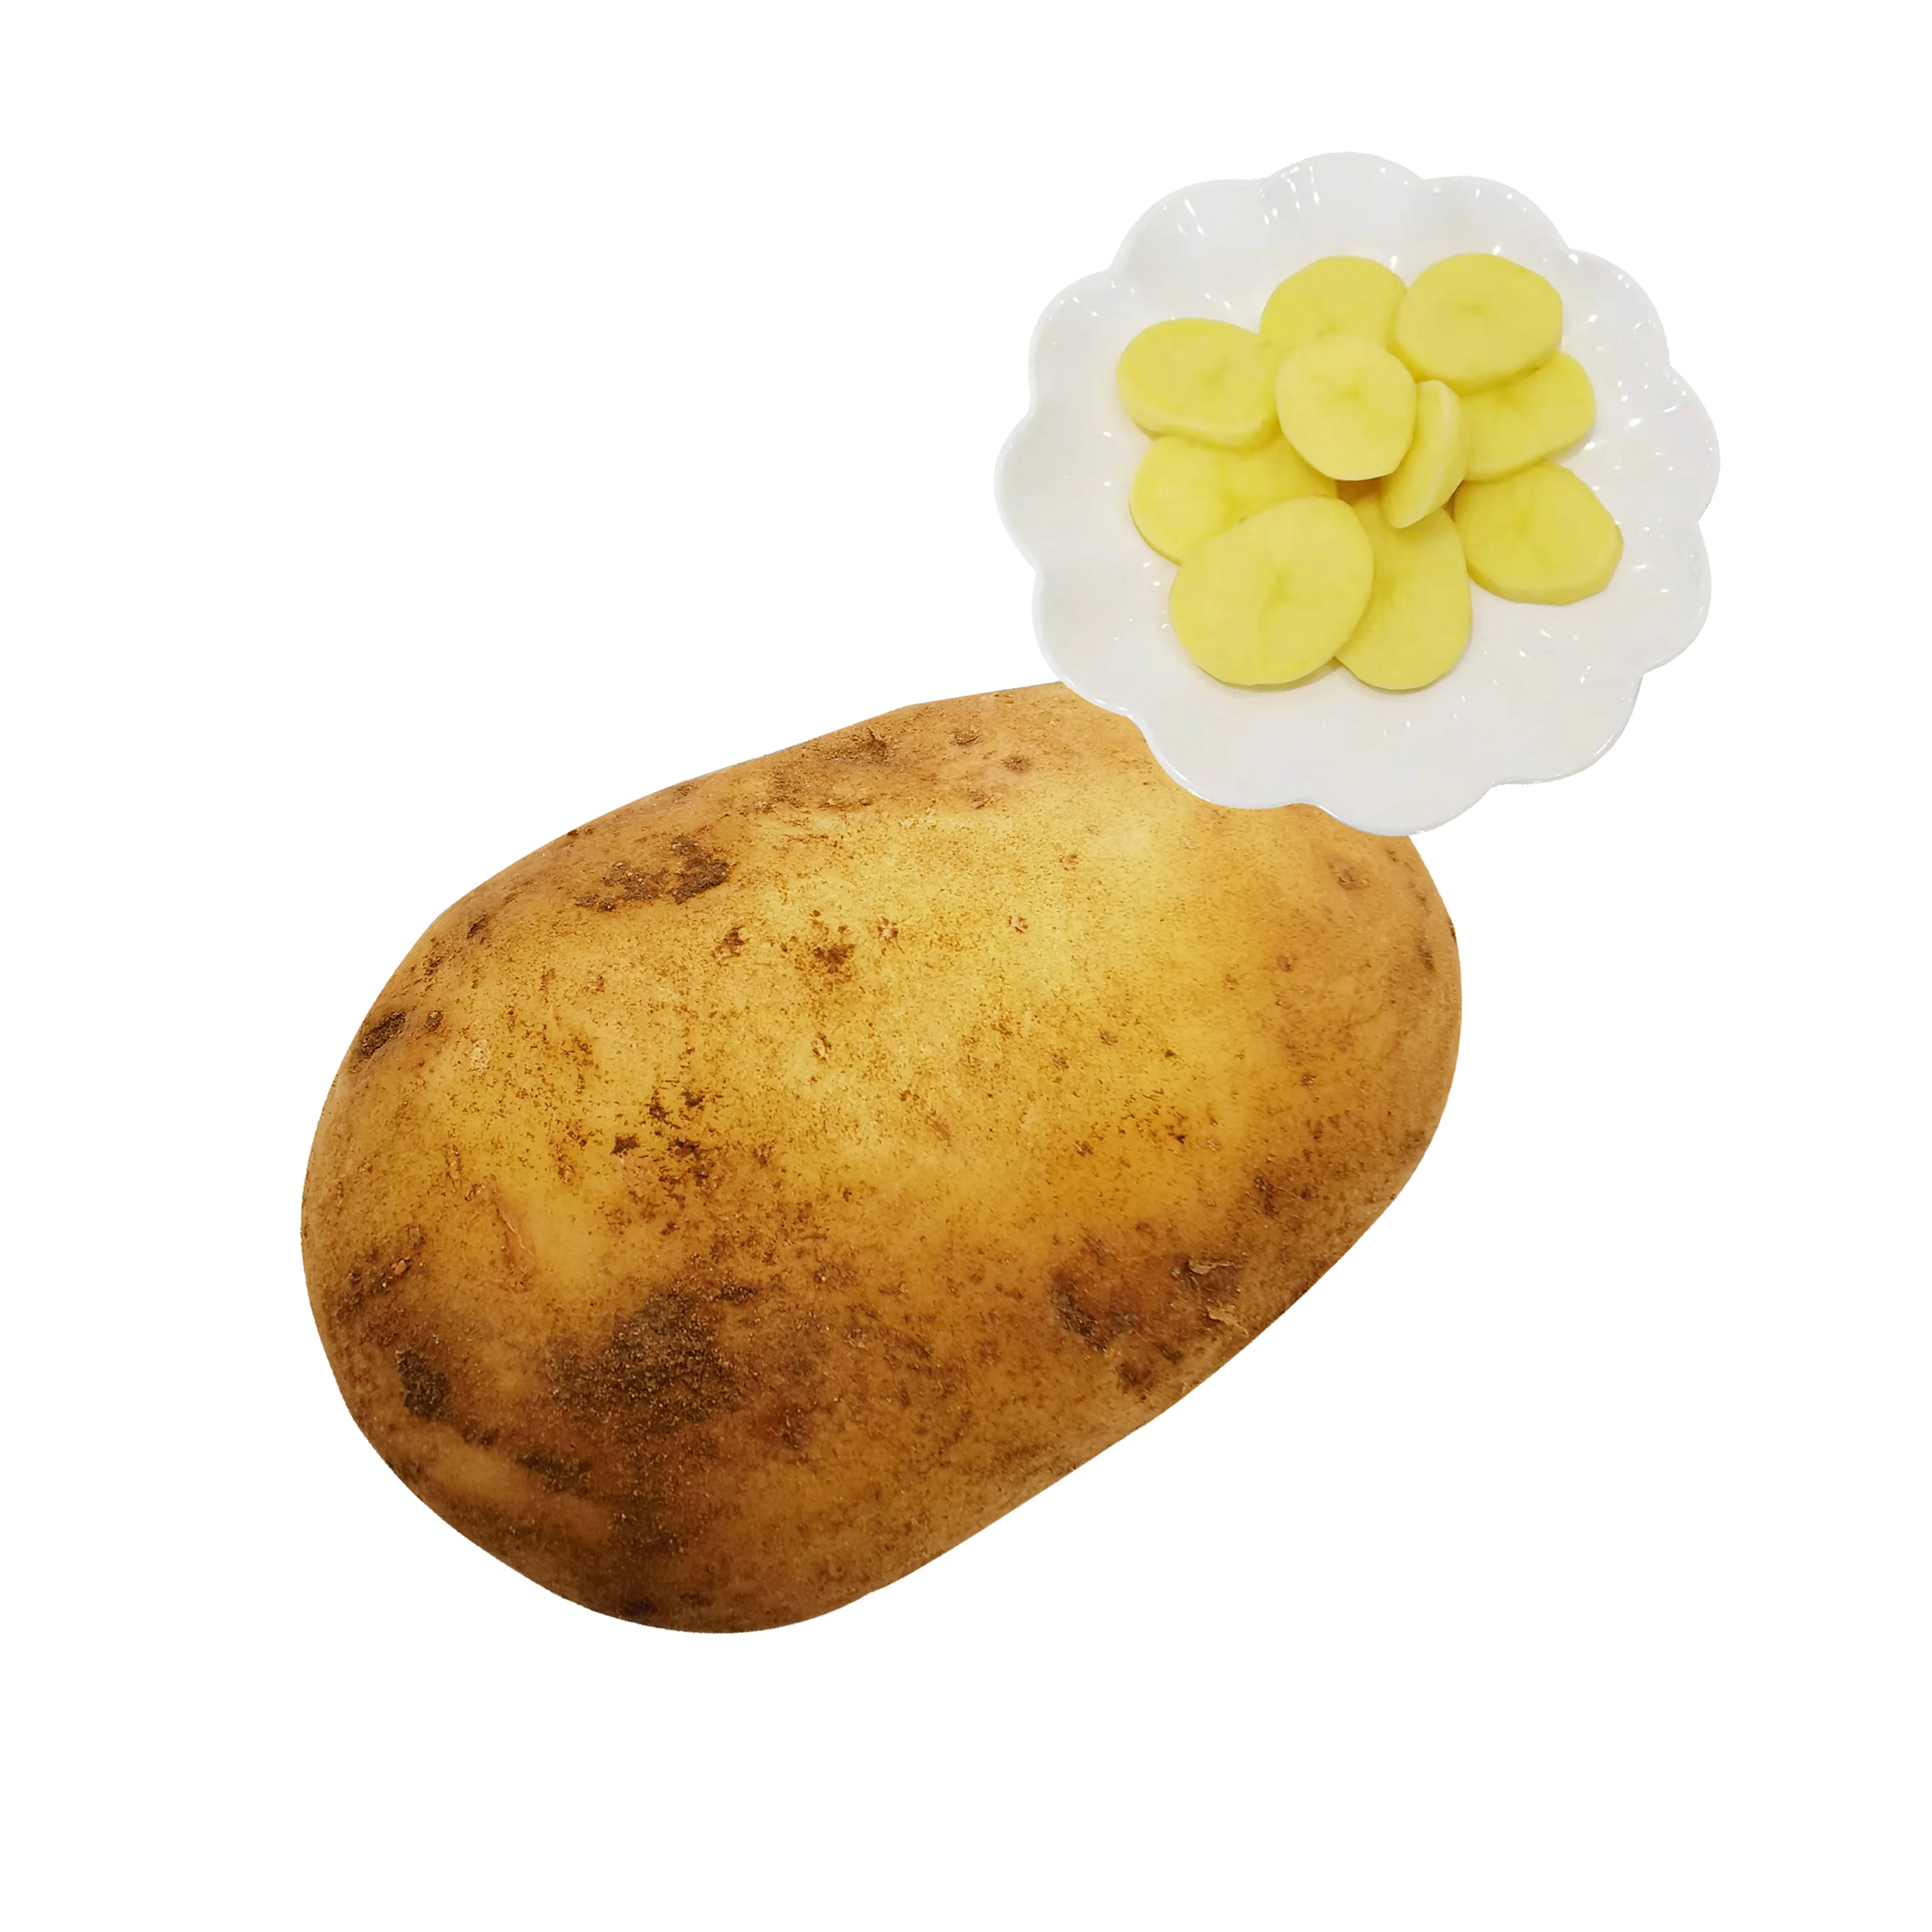 Hot selling High Quality Fresh China Potato Seed Potatoes for Sale